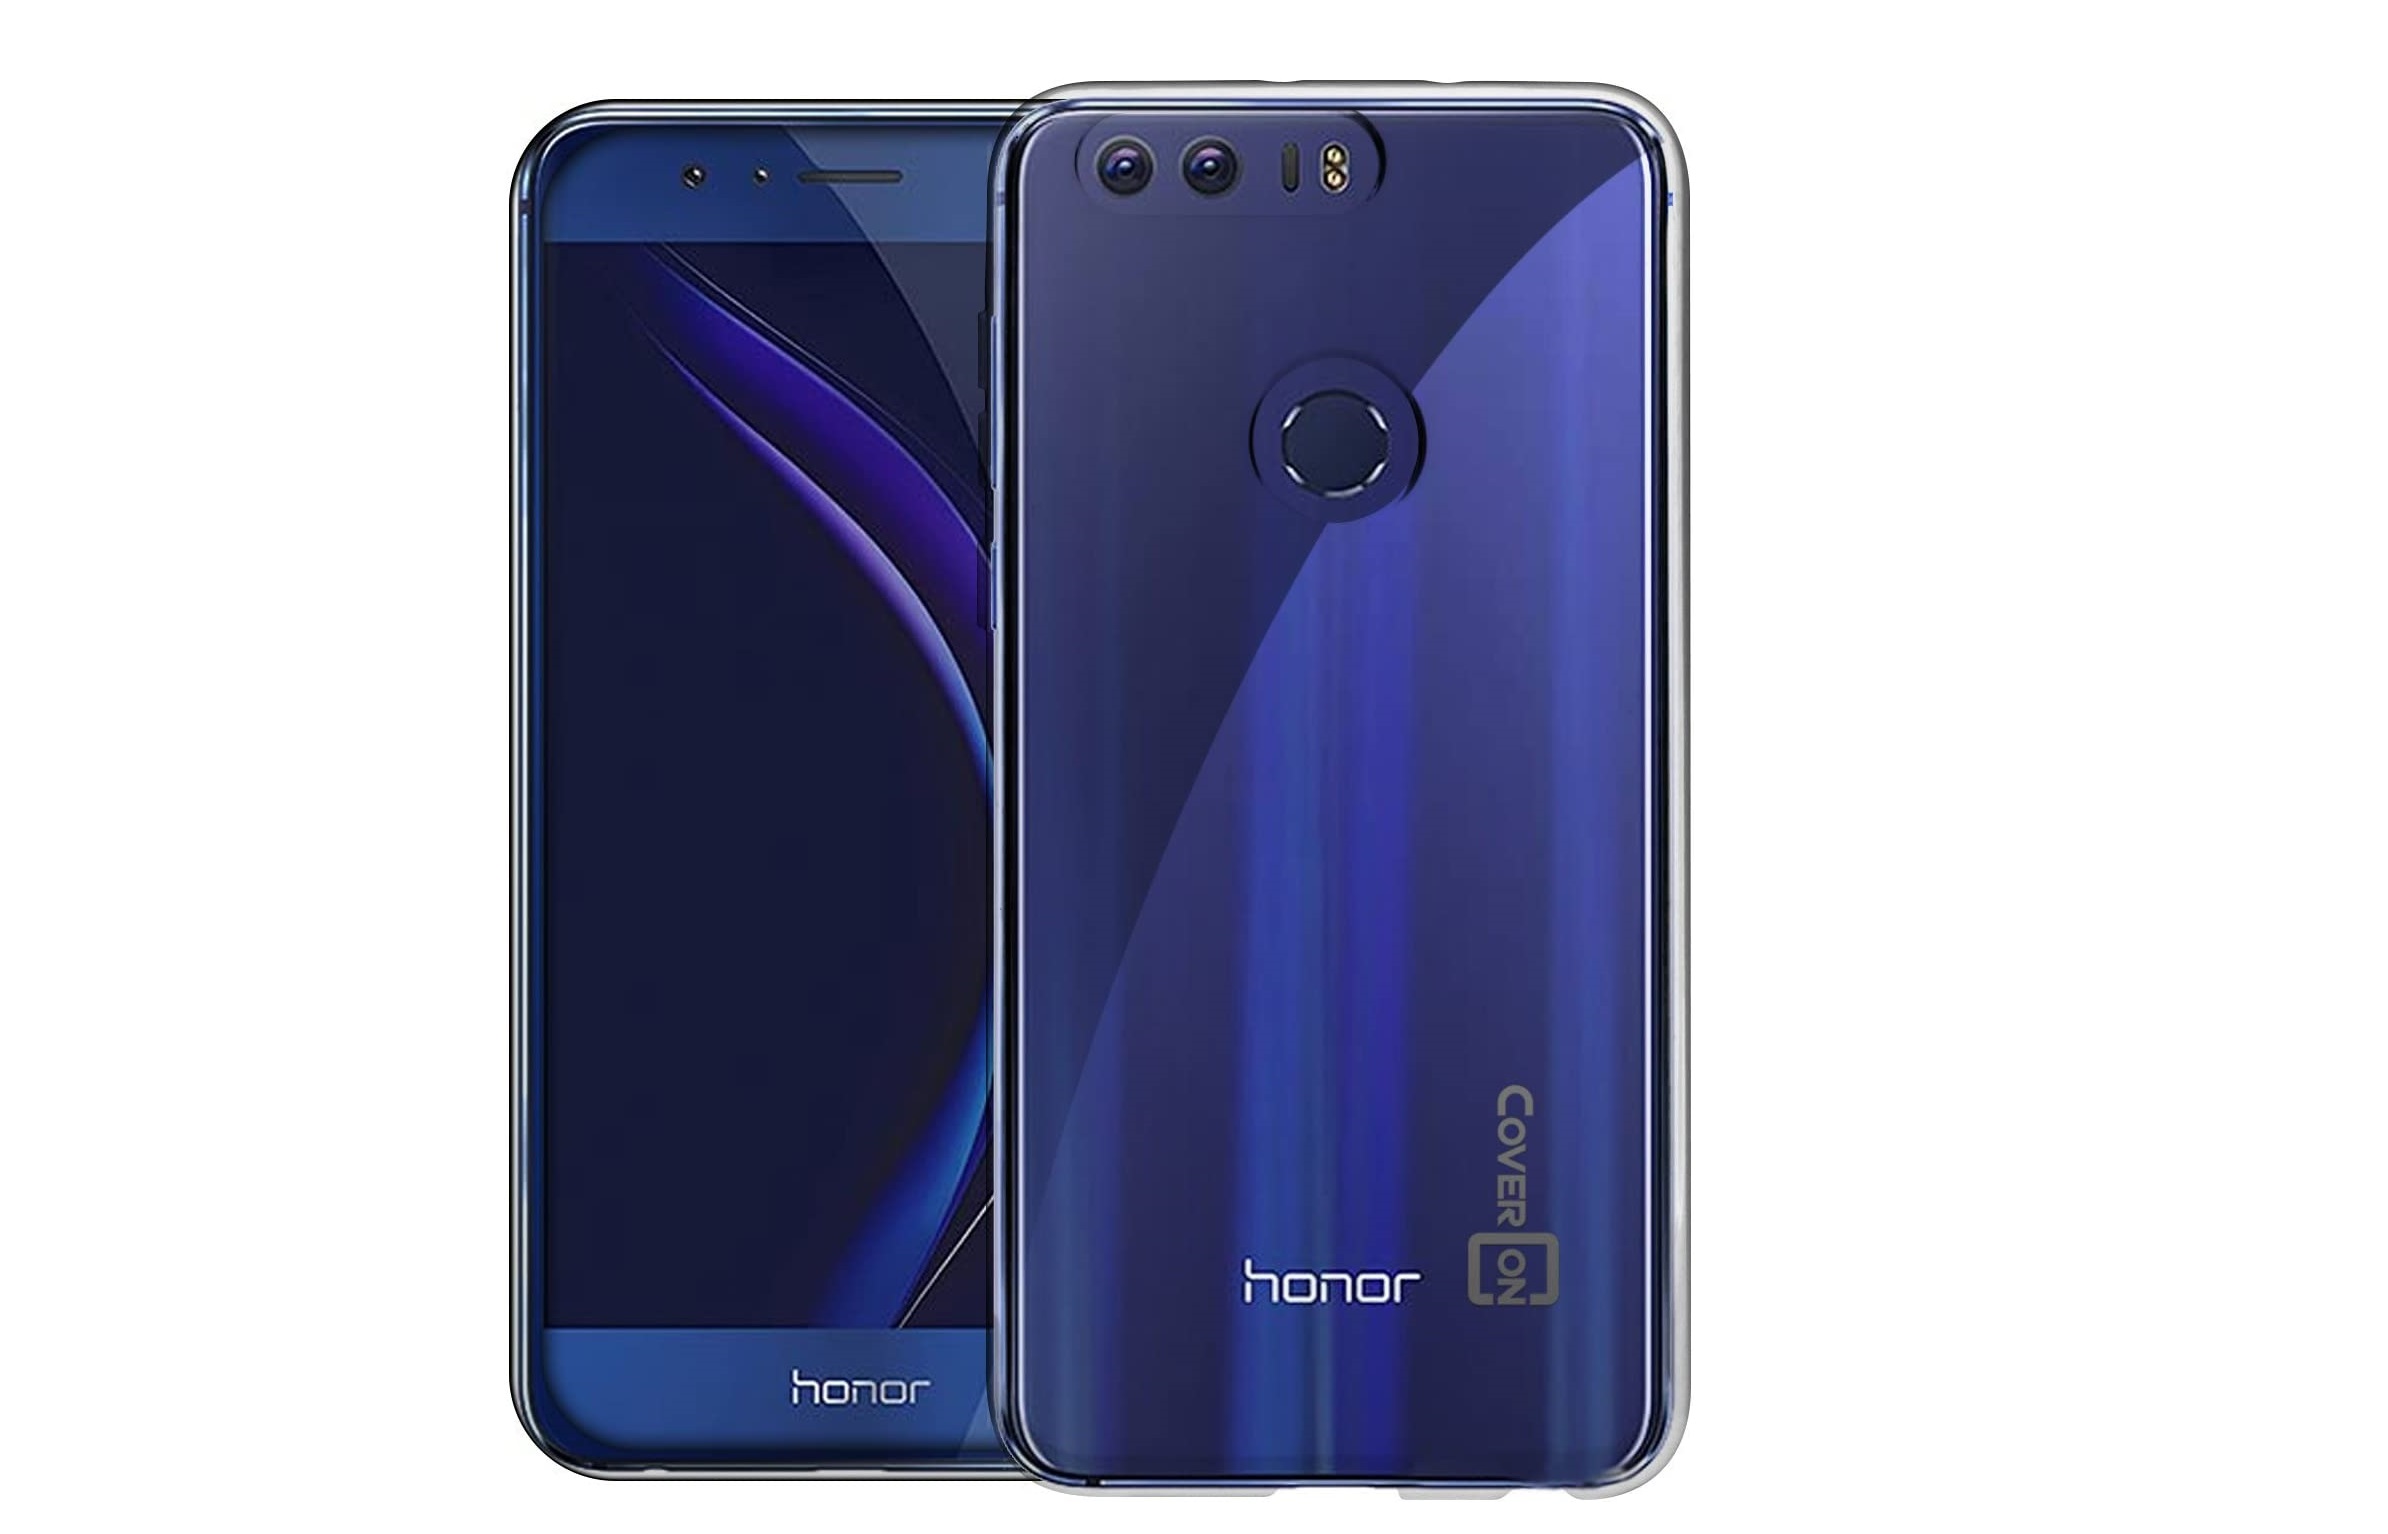 How to Factory Reset Honor 8